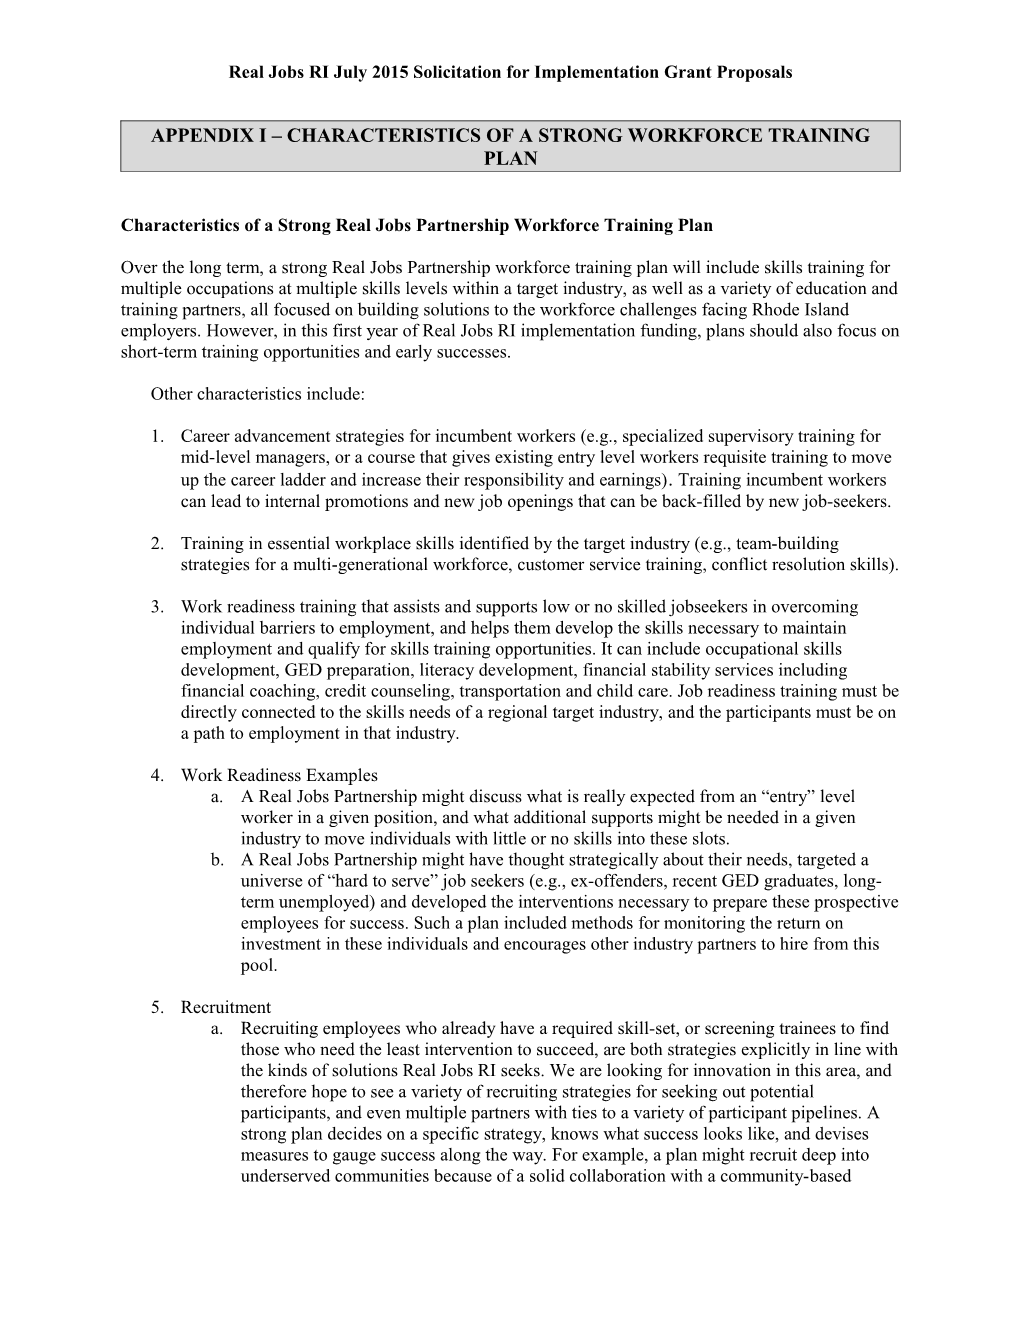 Appendix I Characteristics of a Strong Workforce Training Plan